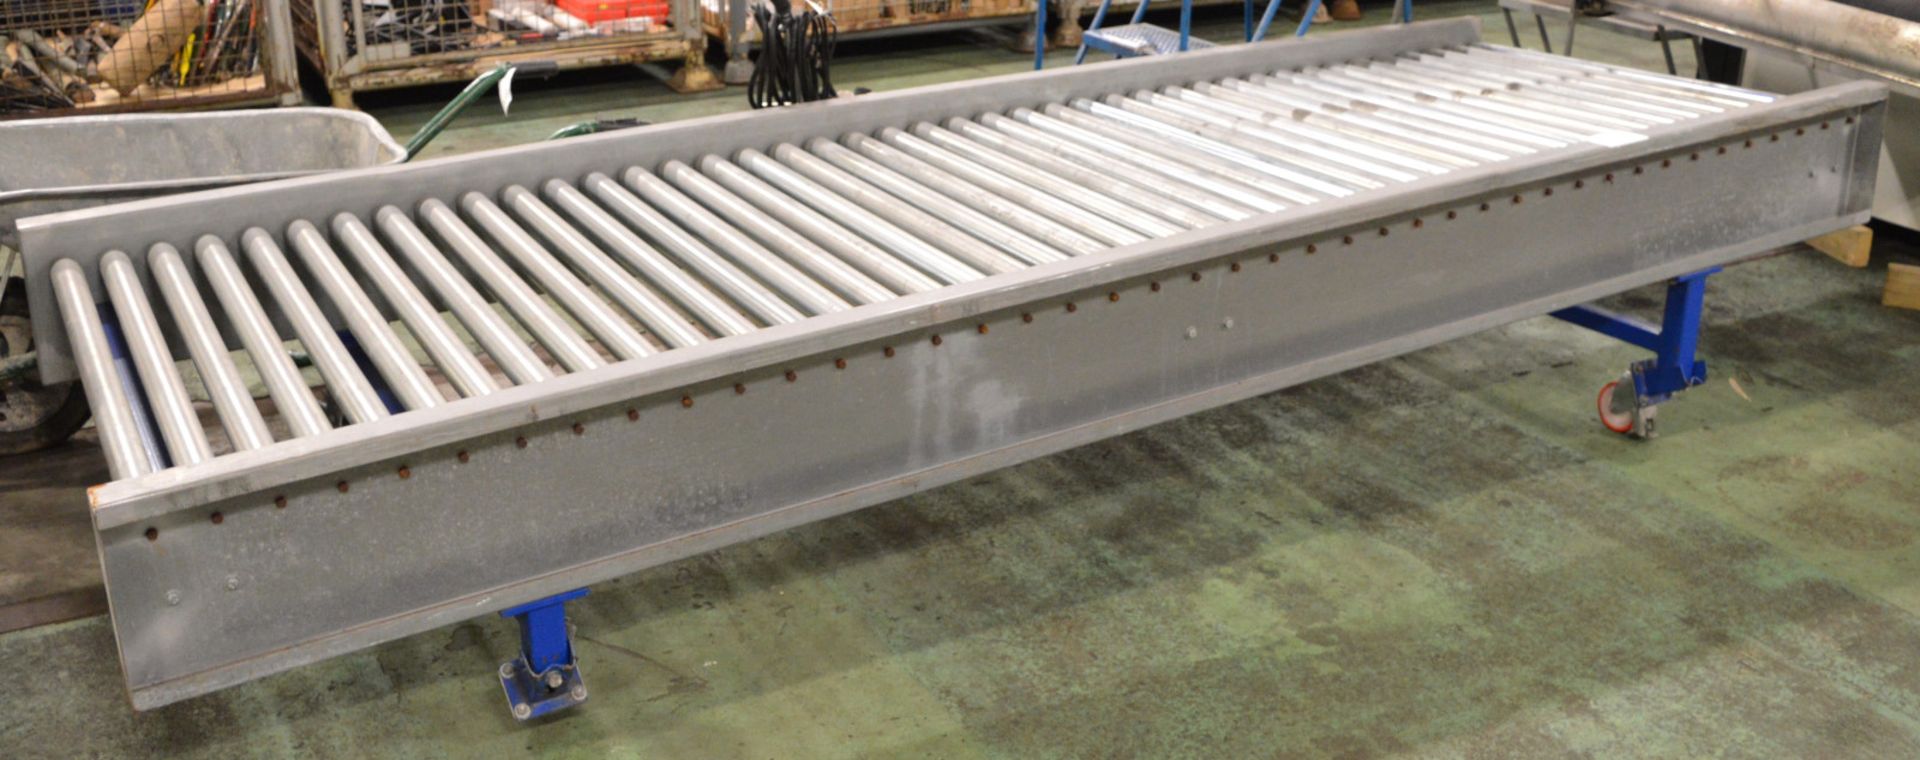 Roller Loading Ramp - 3.2m long x 1.1m wide - Legs require attention.